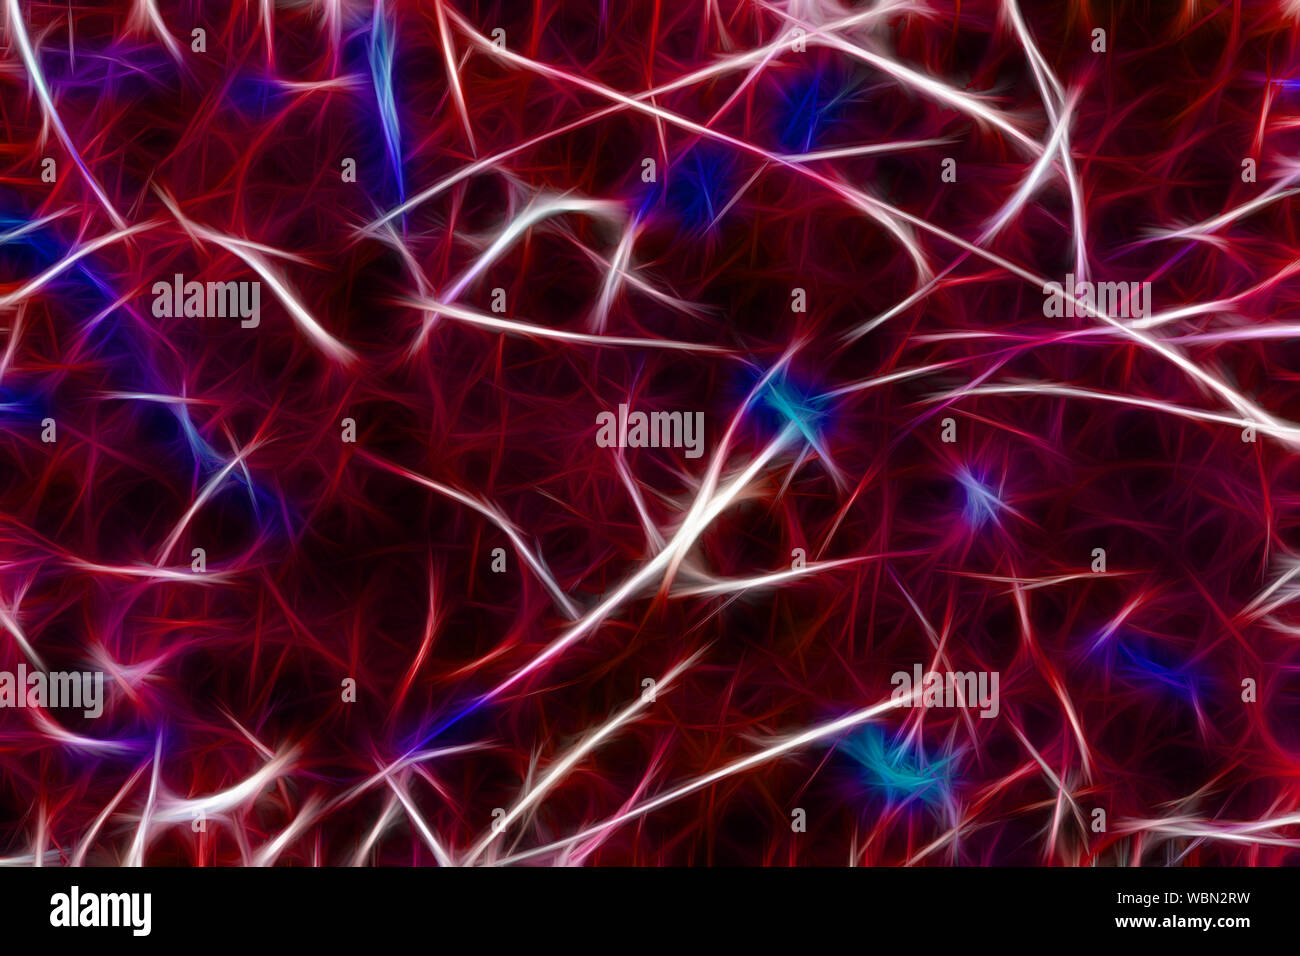 Neuron brain cells abstract background. Neurons connections backdrop painted in red color. Stock Photo